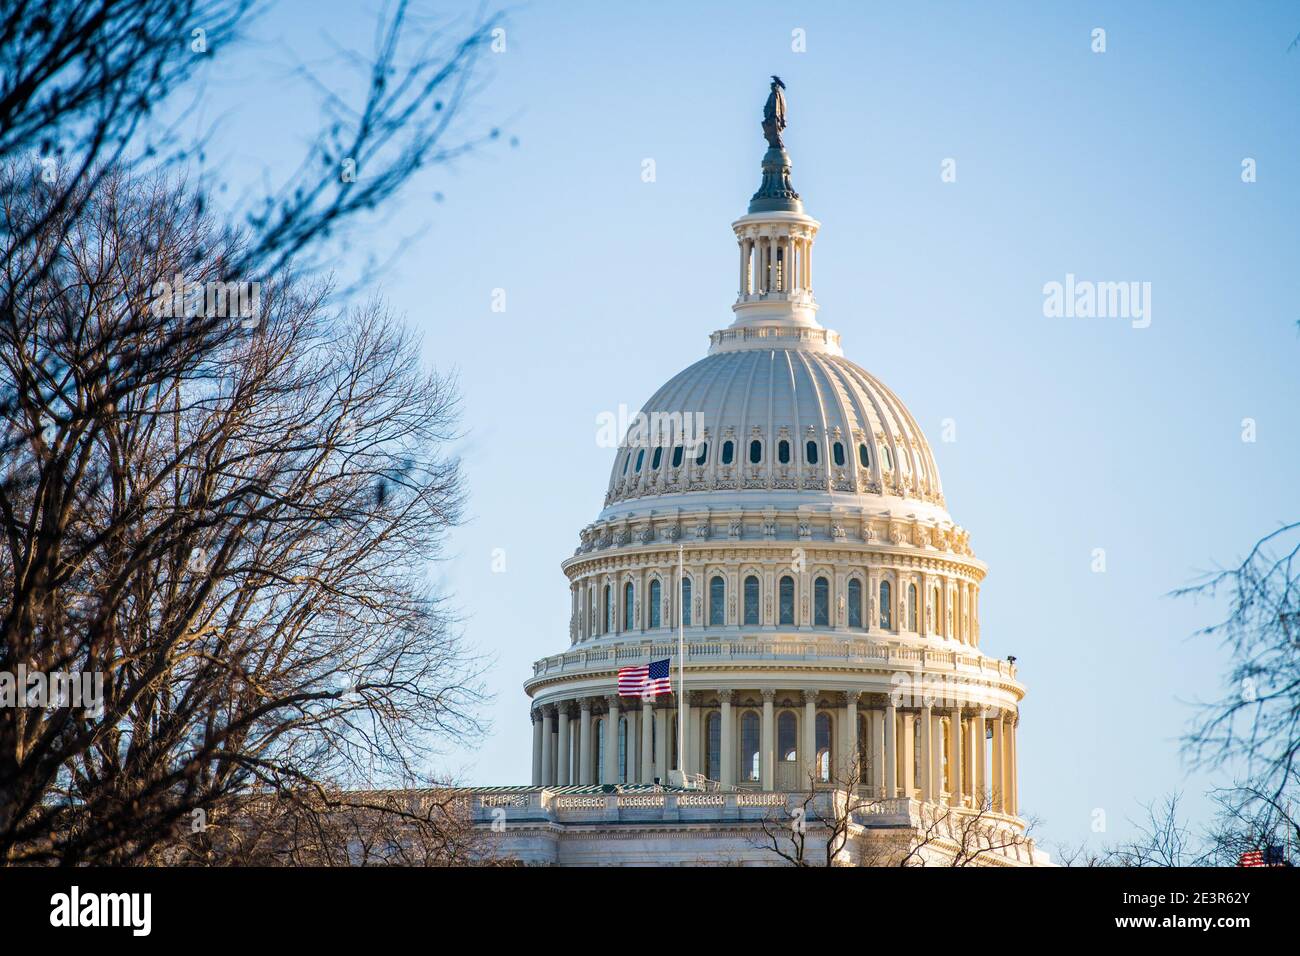 WASHINGTON D.C., JANUARY 19- A general view of the Capitol Building surrounded by fences on the Eve the United States Presidential Inauguration of Joe Biden on January 19, 2021 in Washington D.C. Photo: Chris Tuite/ImageSPACE Stock Photo